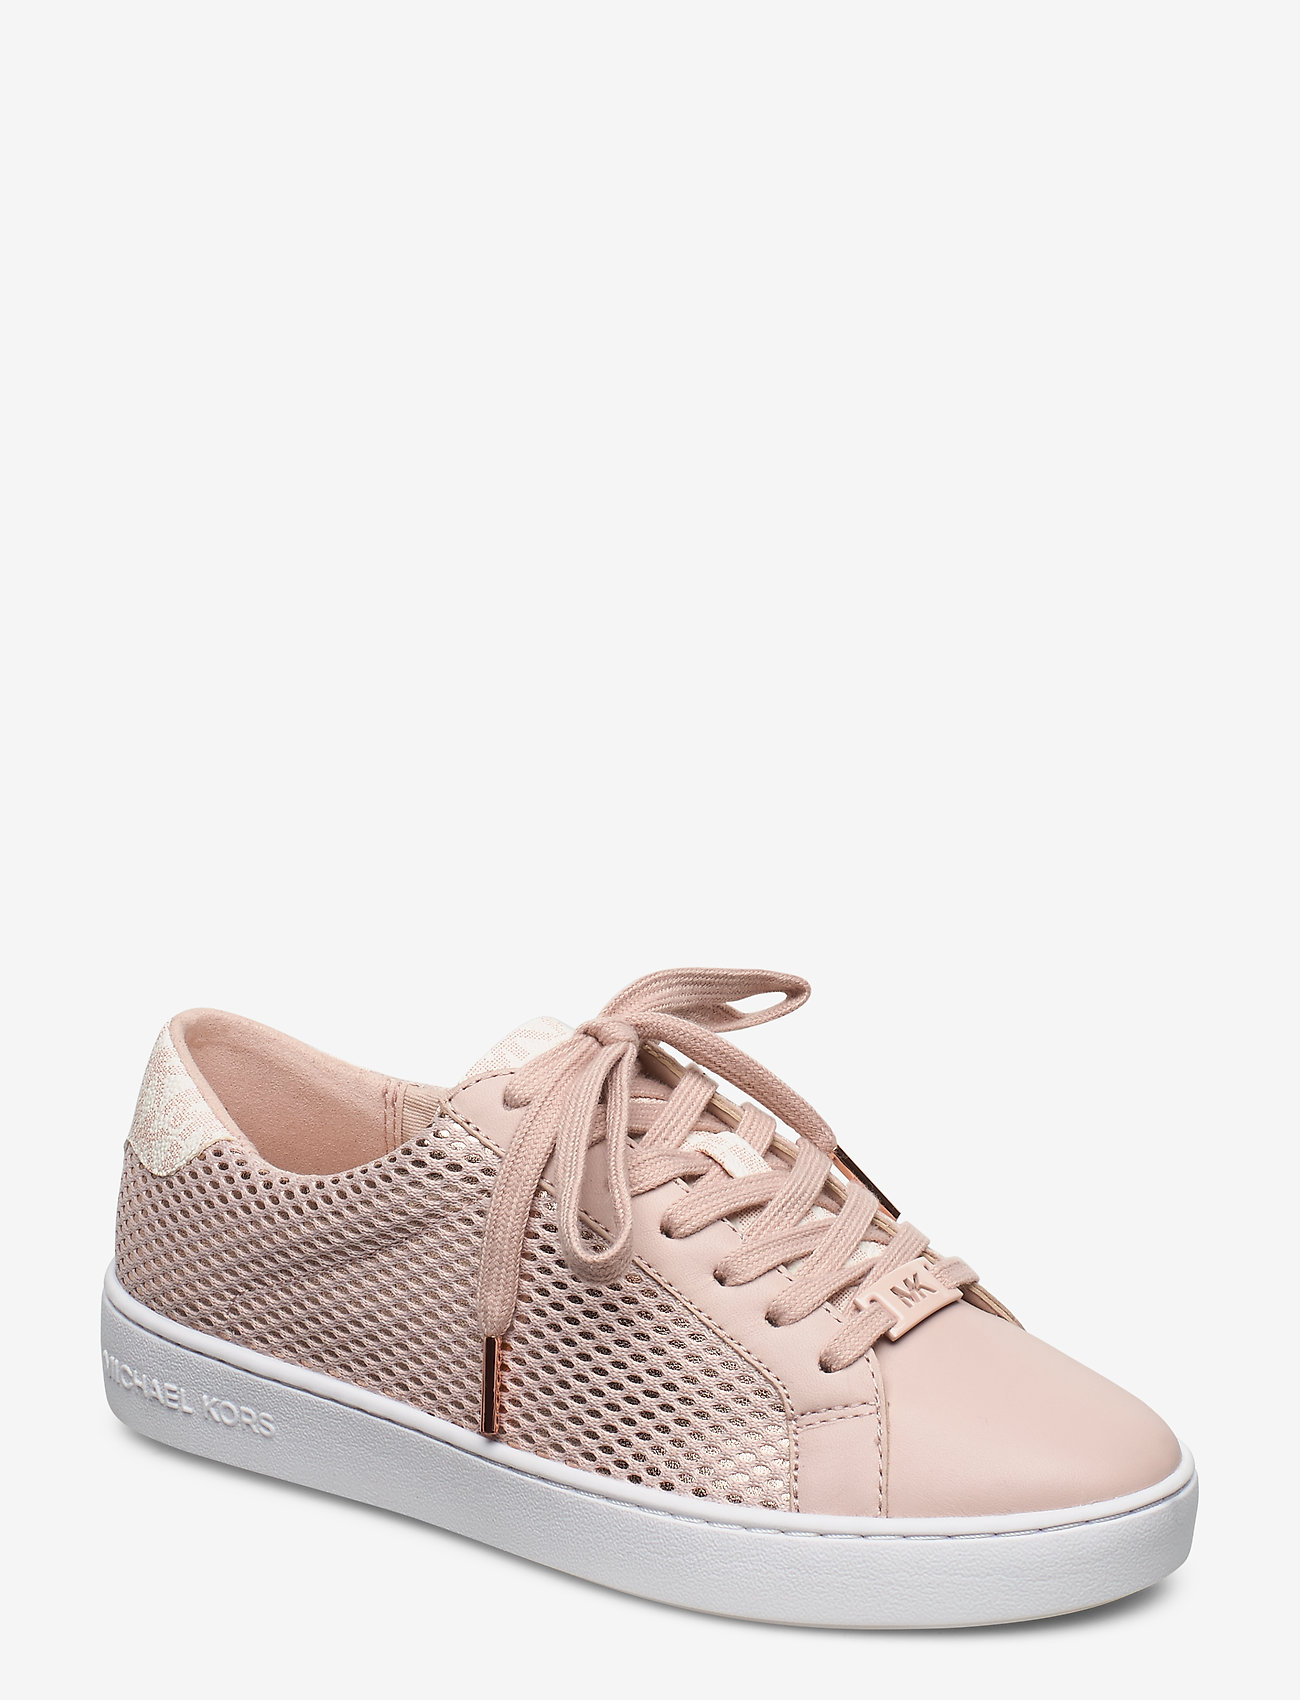 Irving Lace Up (Soft Pink) (98 €) Michael Kors Shoes